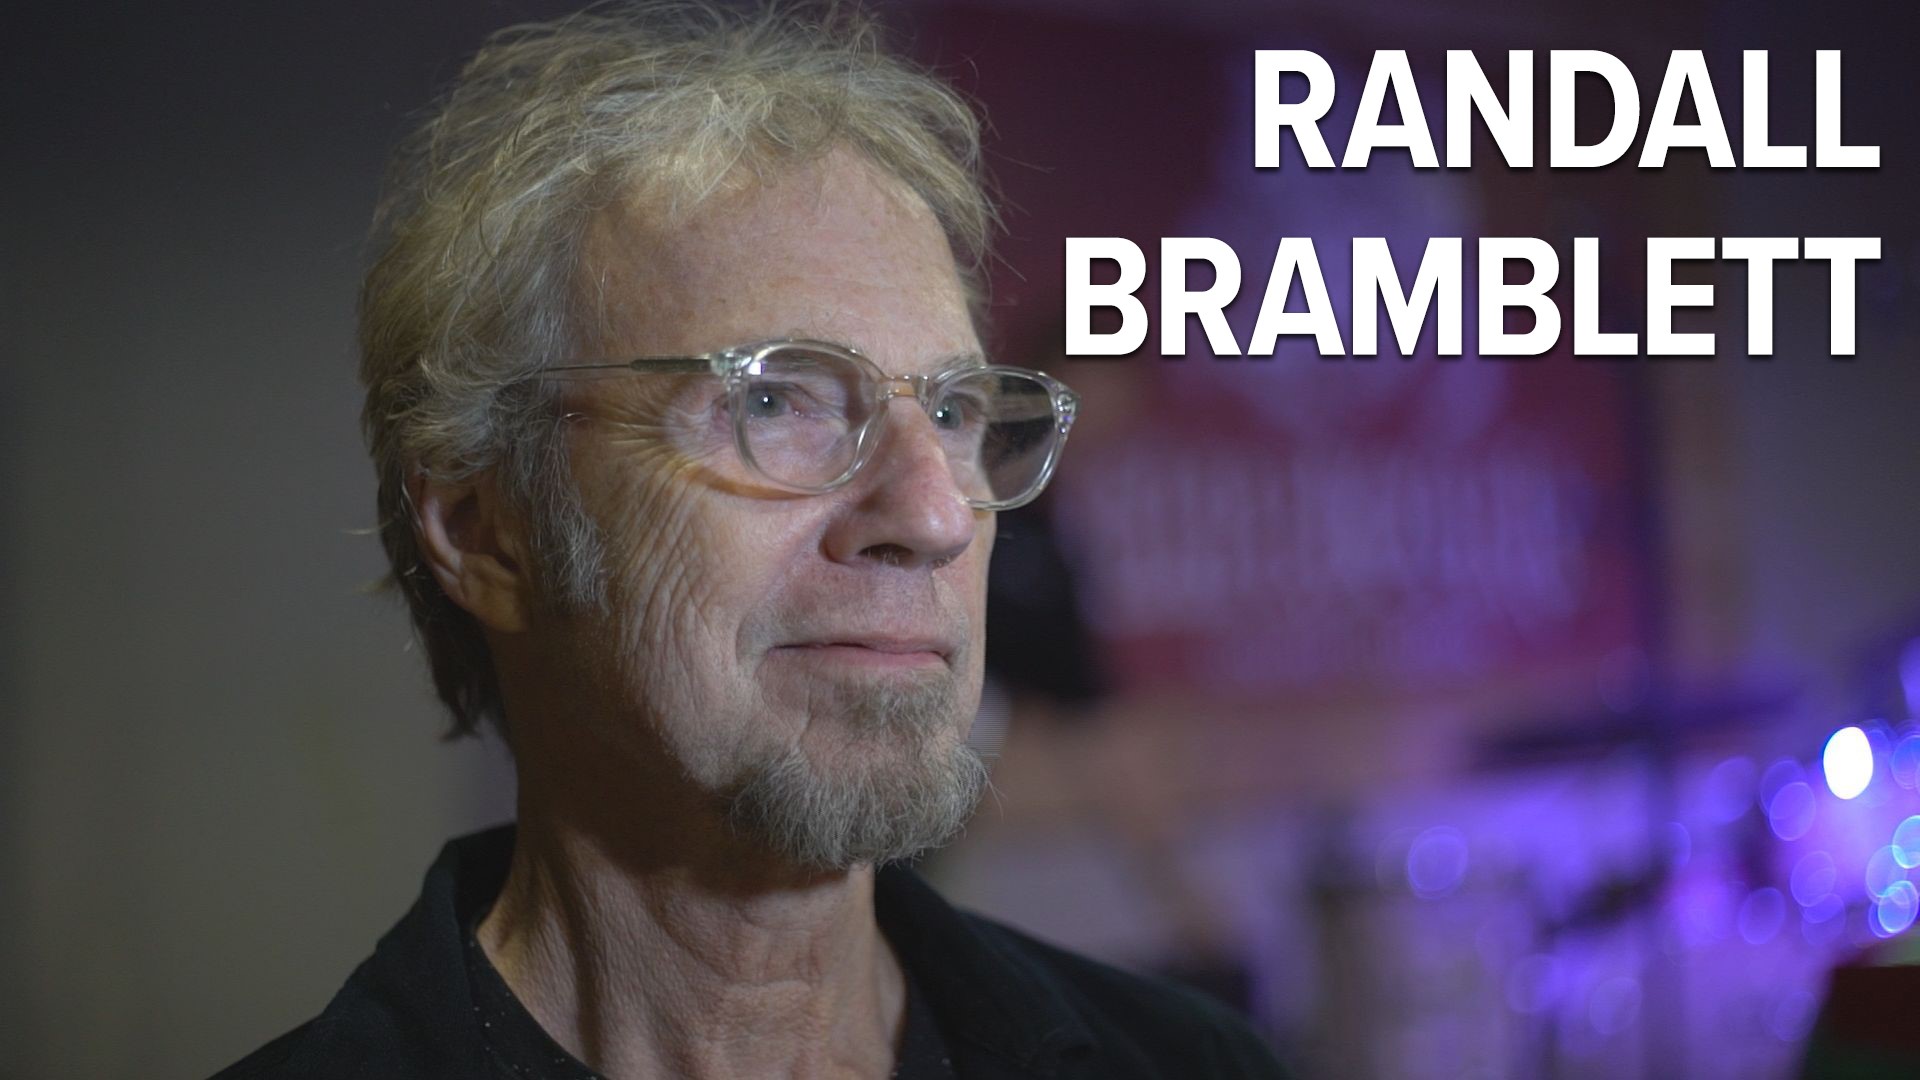 Randall Bramblett and his band performed at the Capricorn Studios VIP reopening party in Macon, Georgia. He says the newly restored studio brings back memories.